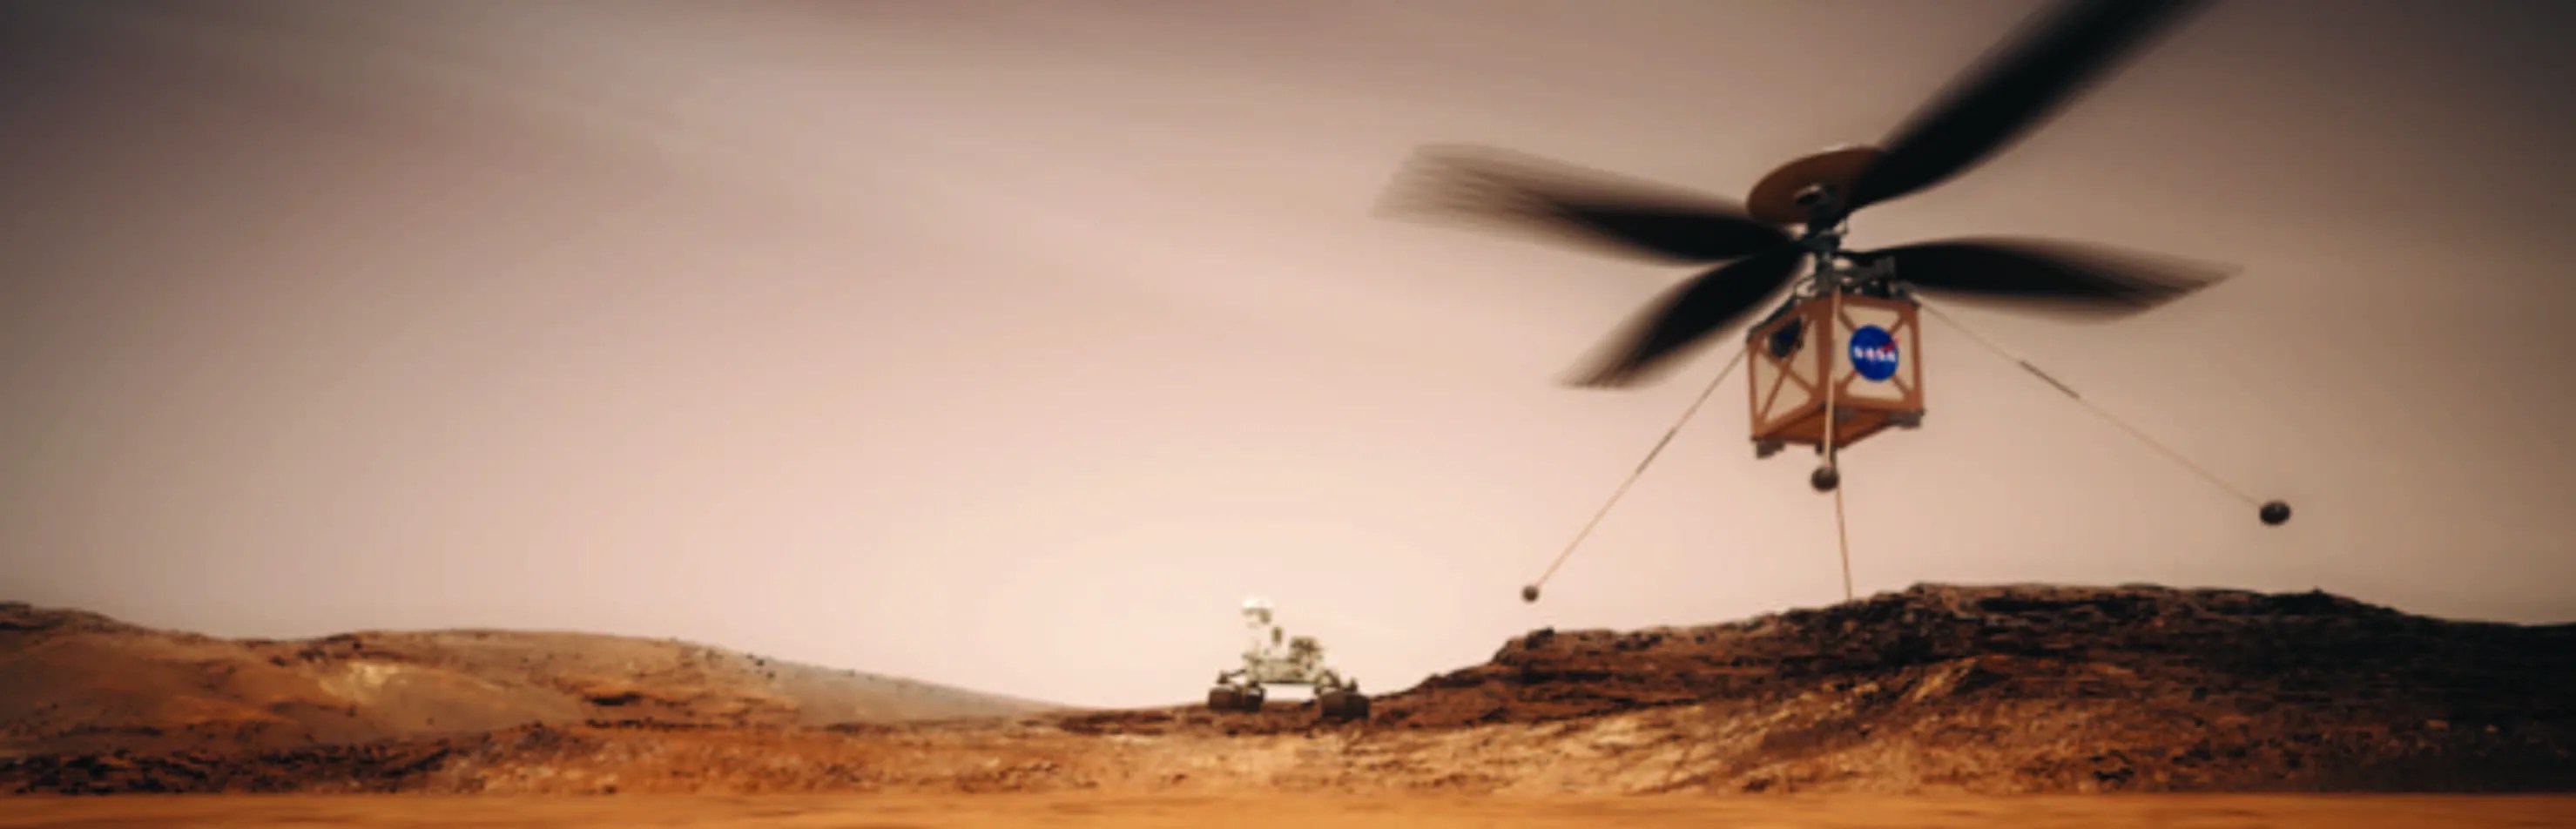 Artist's concept of the Mars Helicopter with the Mars 2020 rover in the background